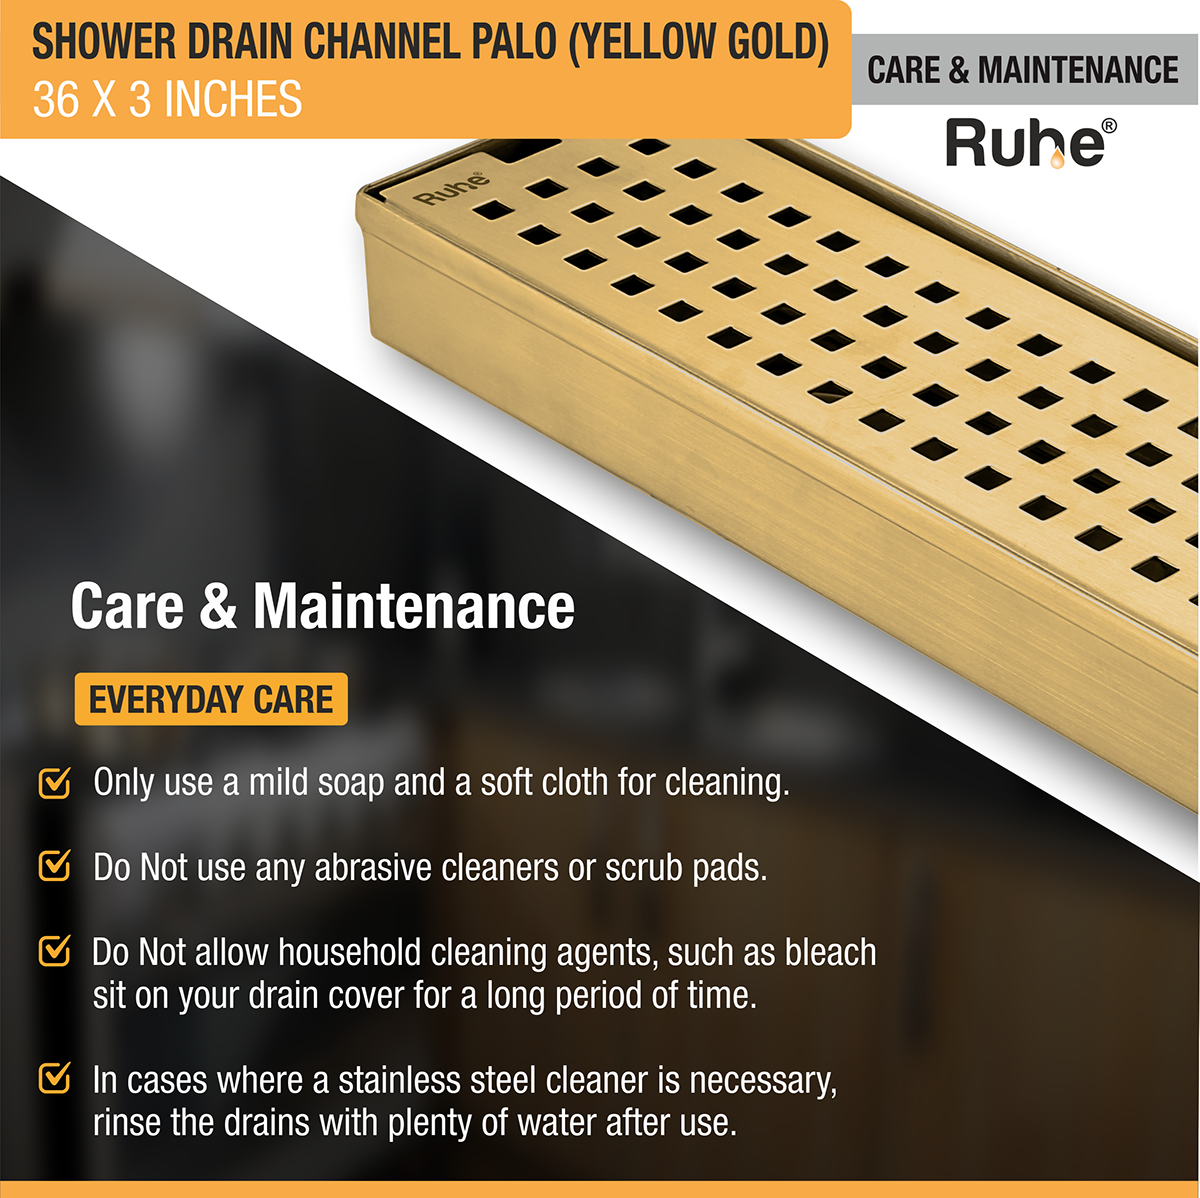 Palo Shower Drain Channel (36 x 3 Inches) YELLOW GOLD care and maintenance